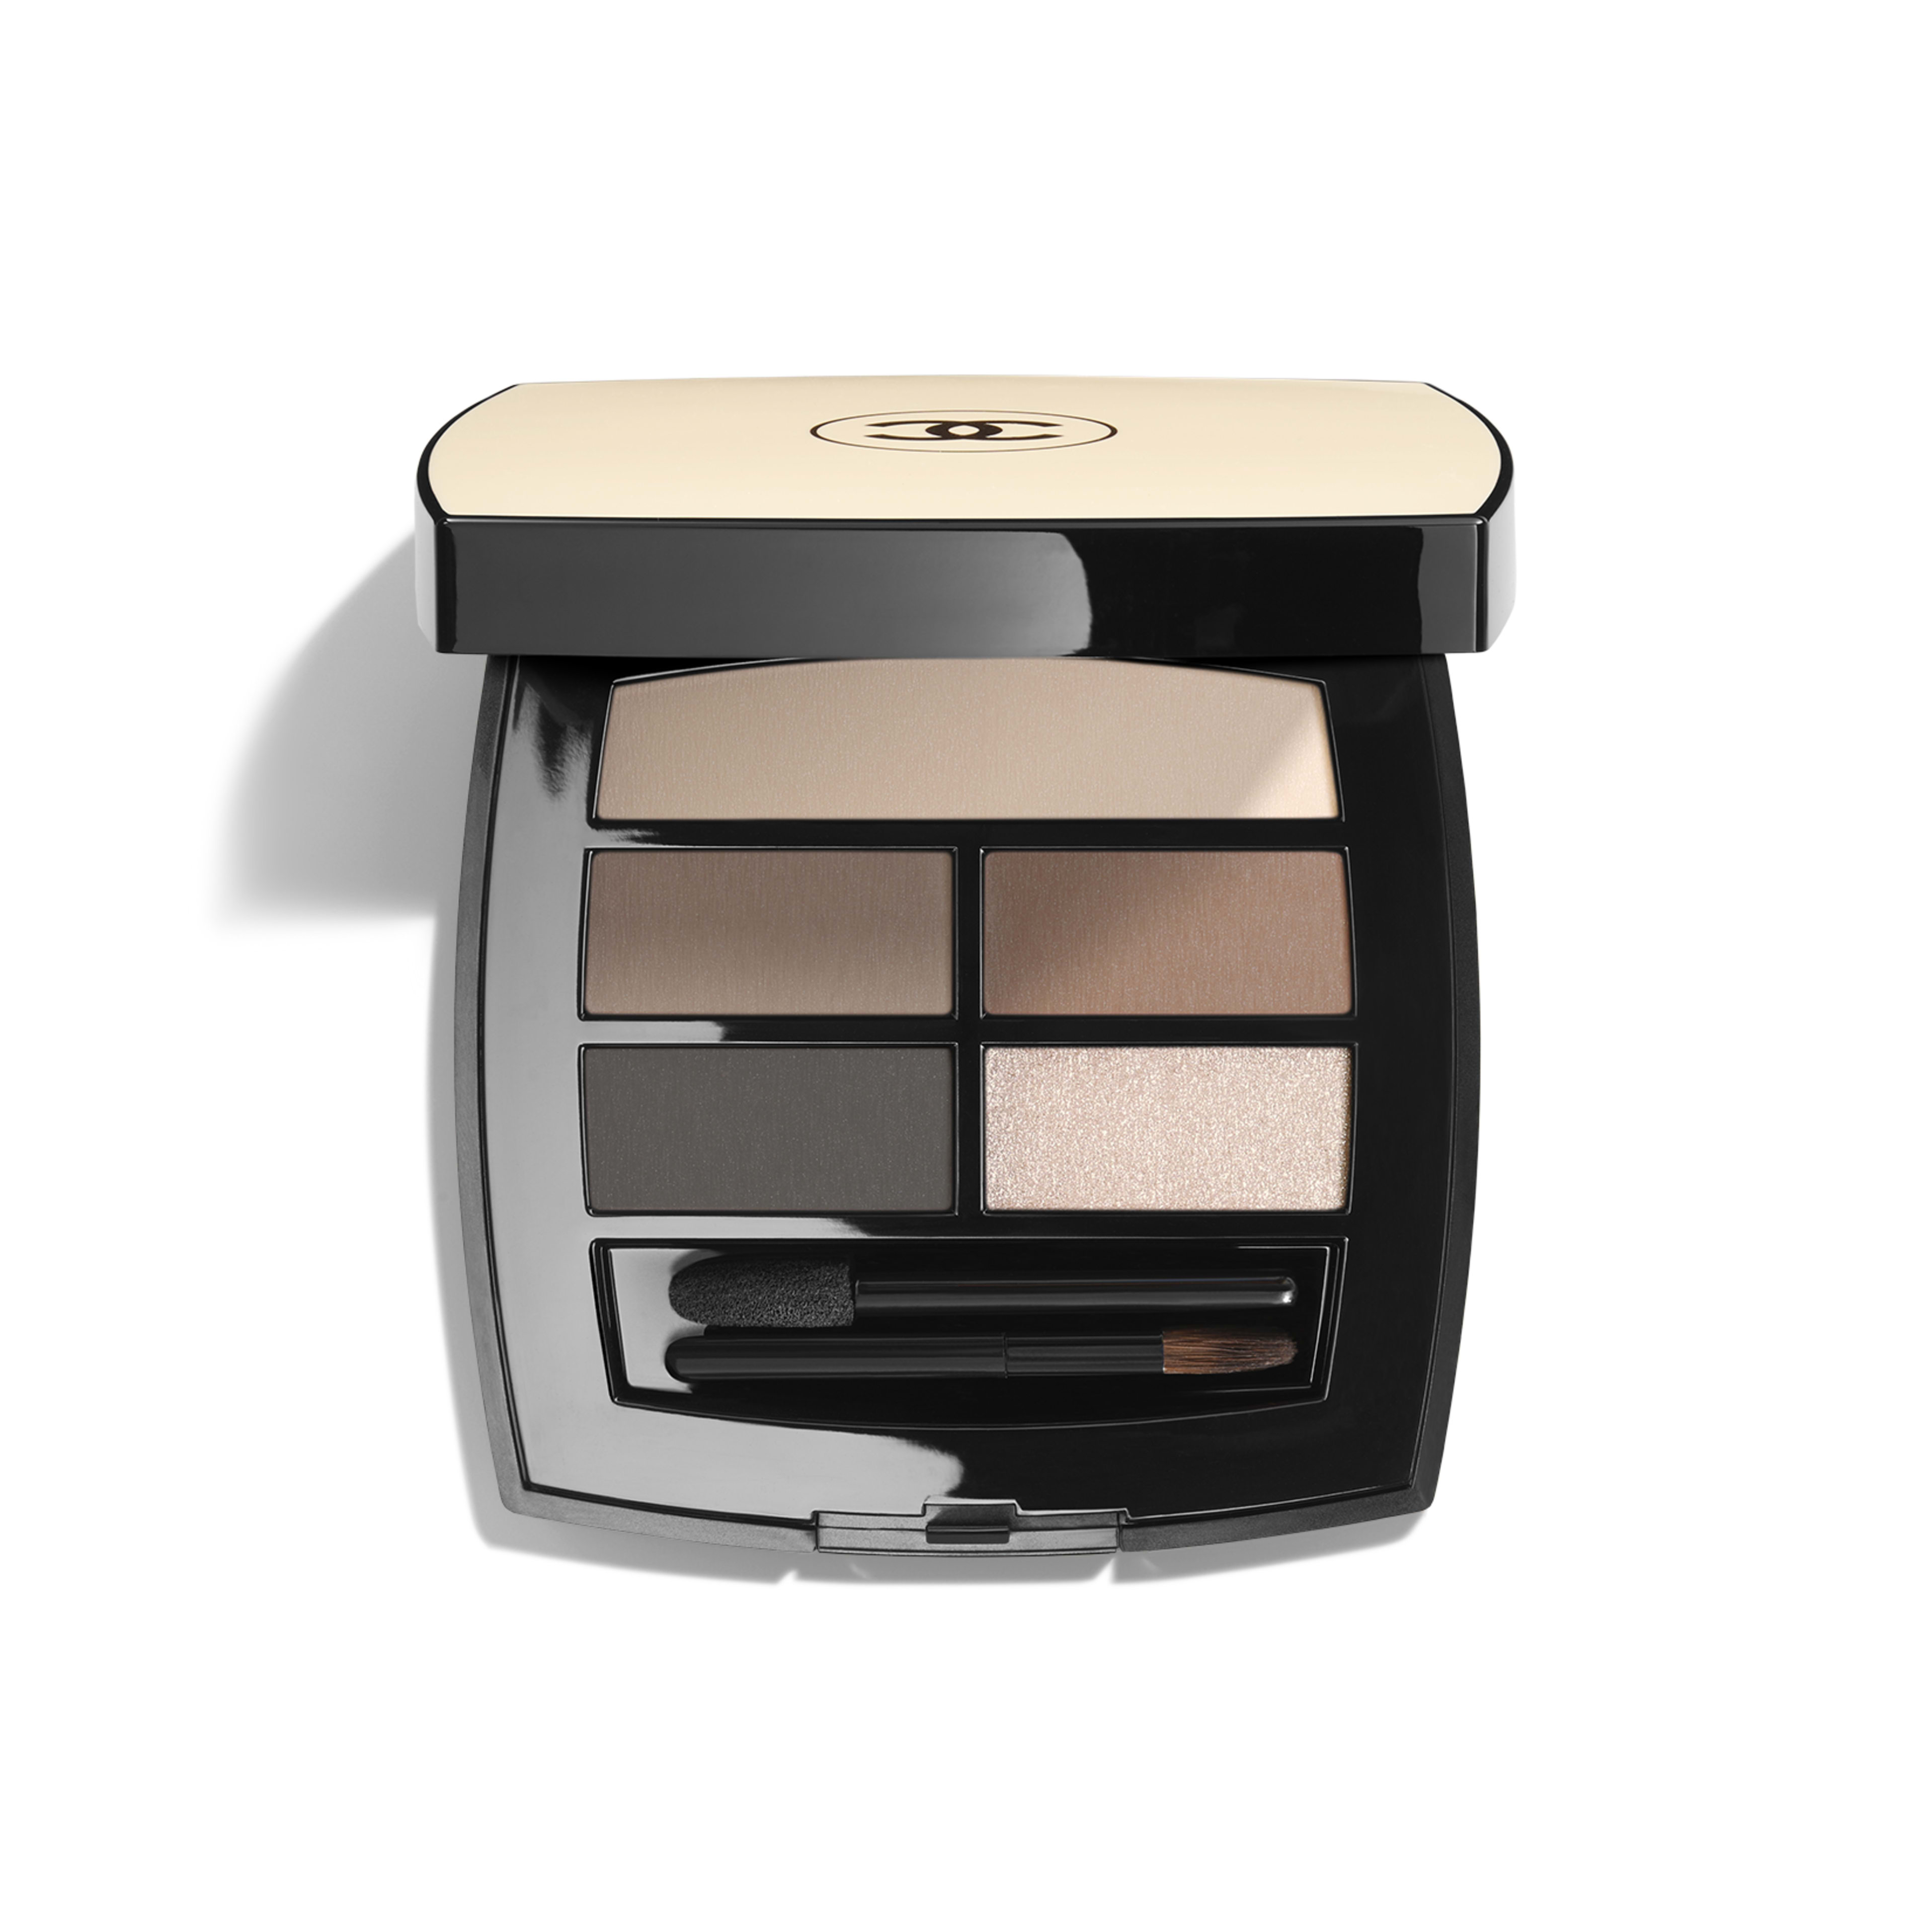 French Beauty Products Women Over 50: Chanel Les Beiges Healthy Glow Natural Eyeshadow Palette